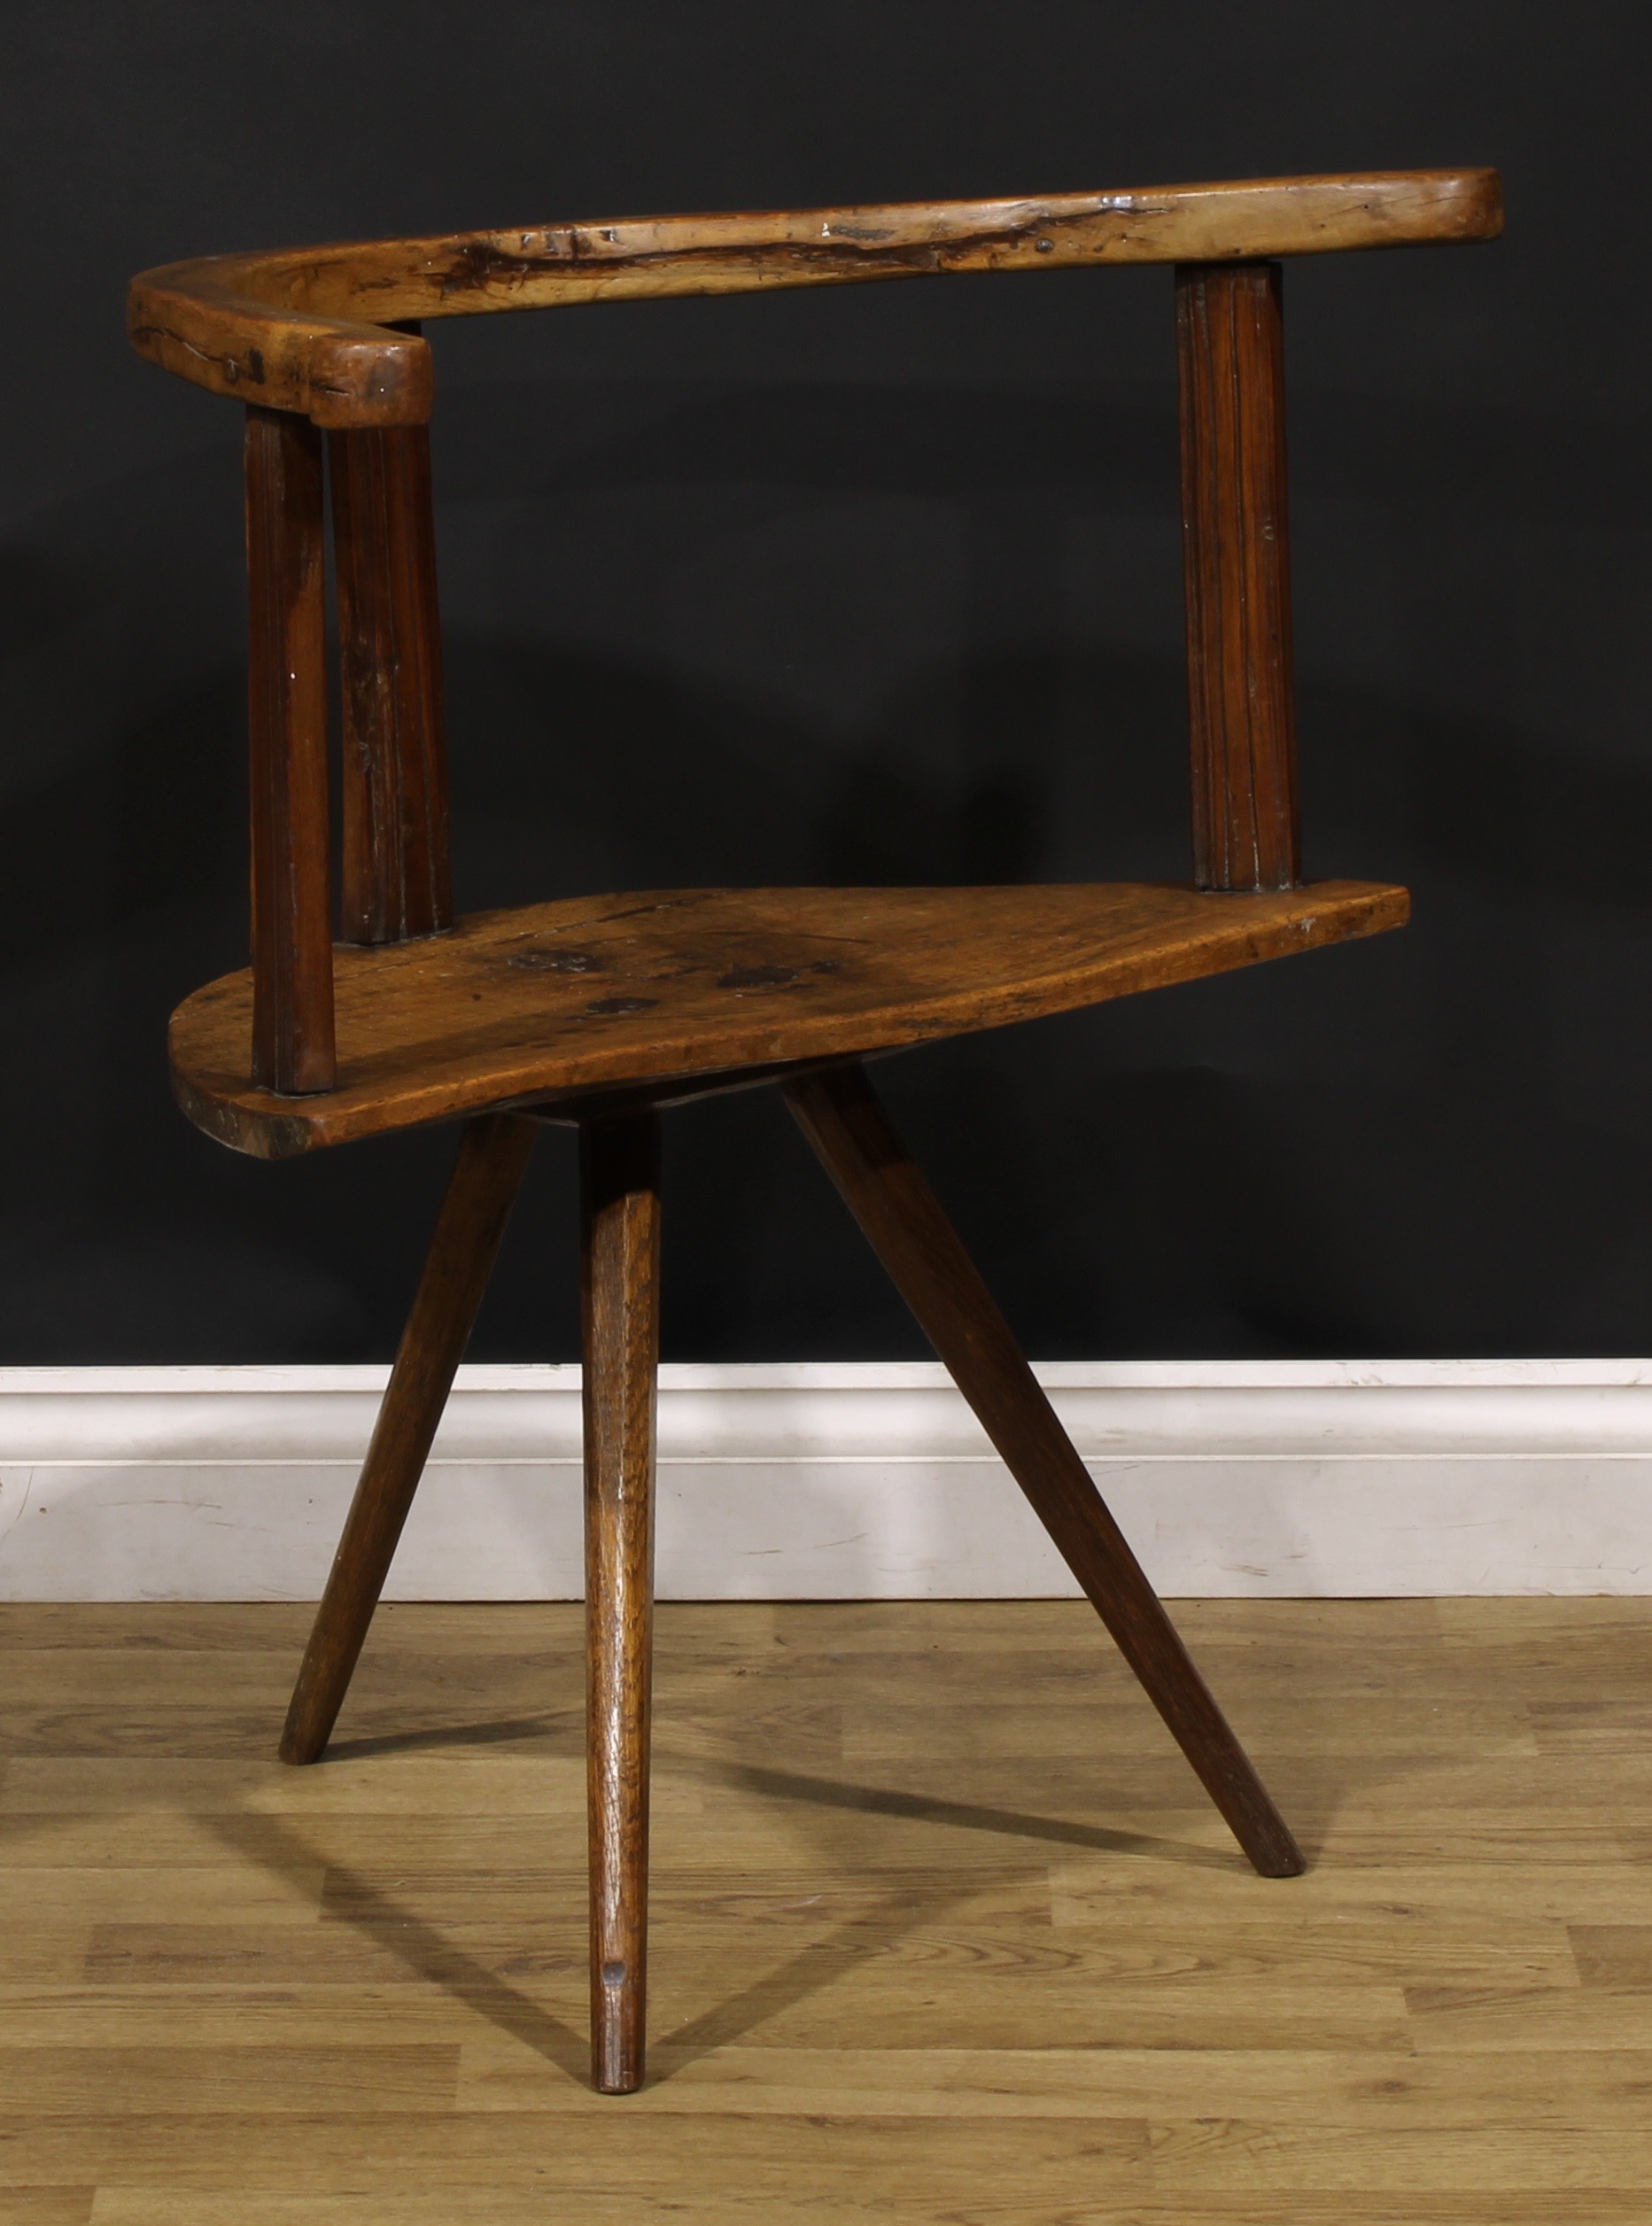 A 19th century primitive and vernacular indigenous timber cricket-form hedge or famine chair, - Image 2 of 4